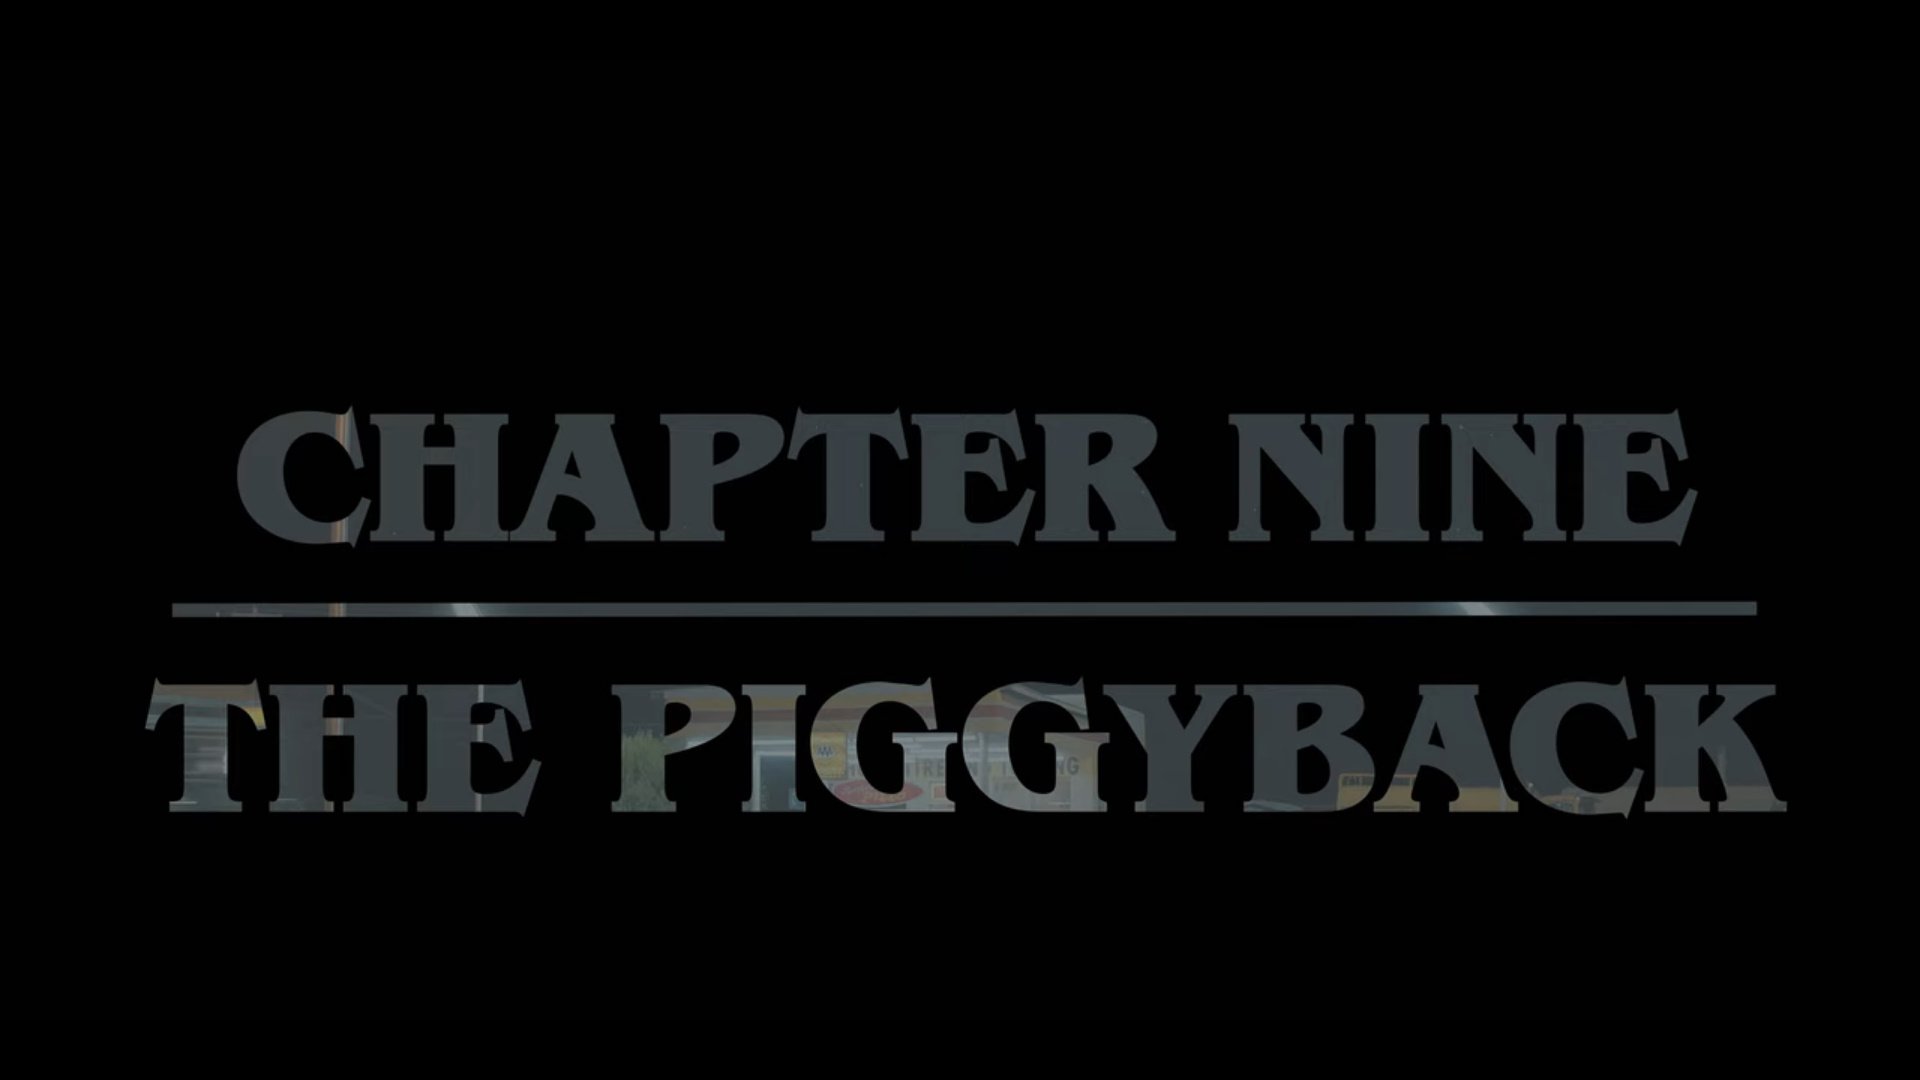 Stranger Things: Season 4/ Episode 9 “Chapter Nine: The Piggyback” [Finale] – Recap/ Review (with Spoilers)